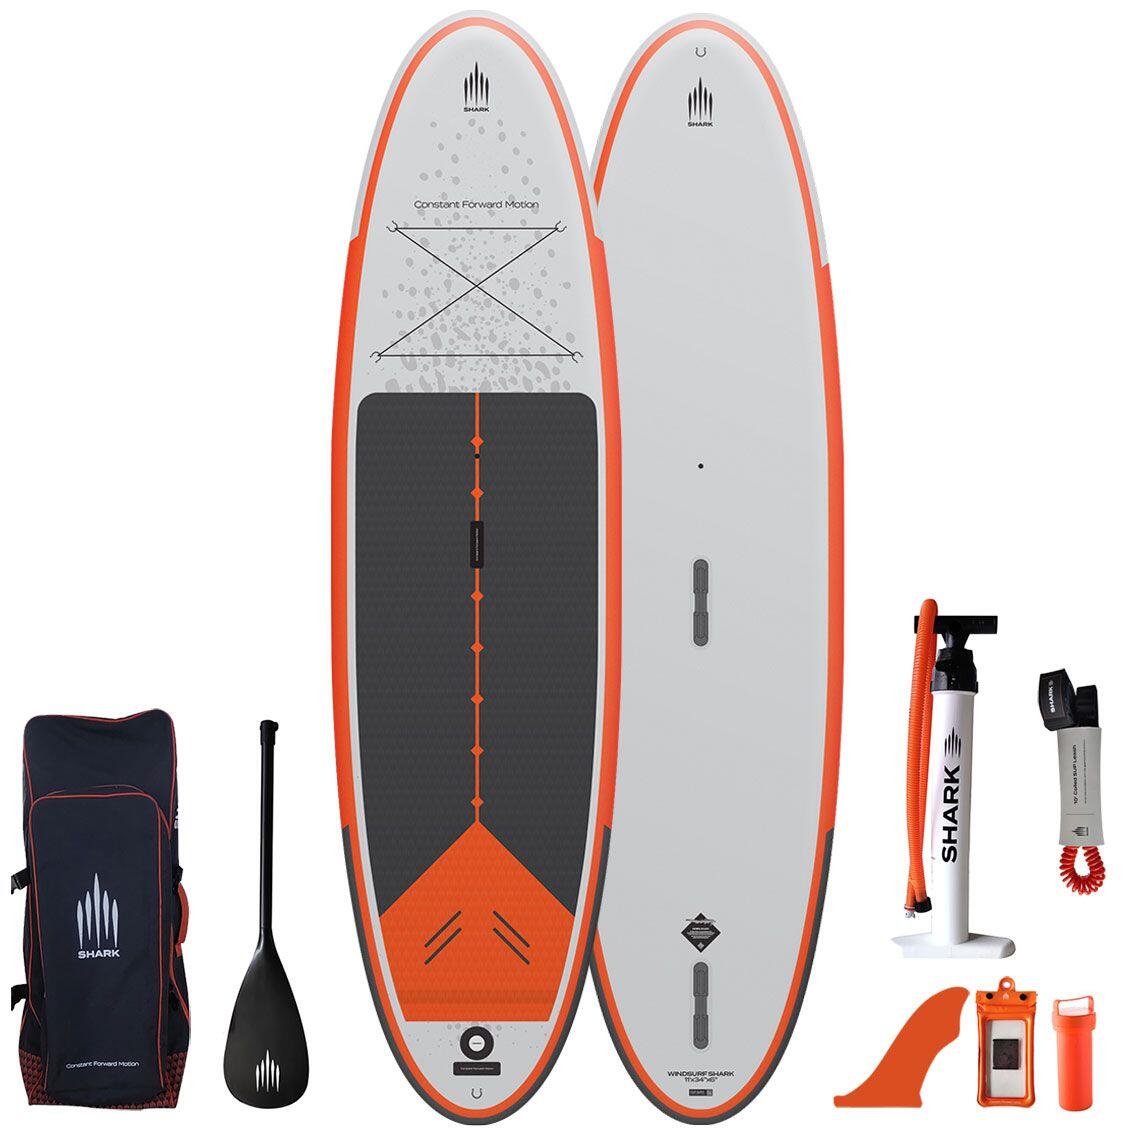 SHARK ALL ROUND 3-in-1 WIND SUP 10'6 X 32" X 5" Paddle Board 1/7